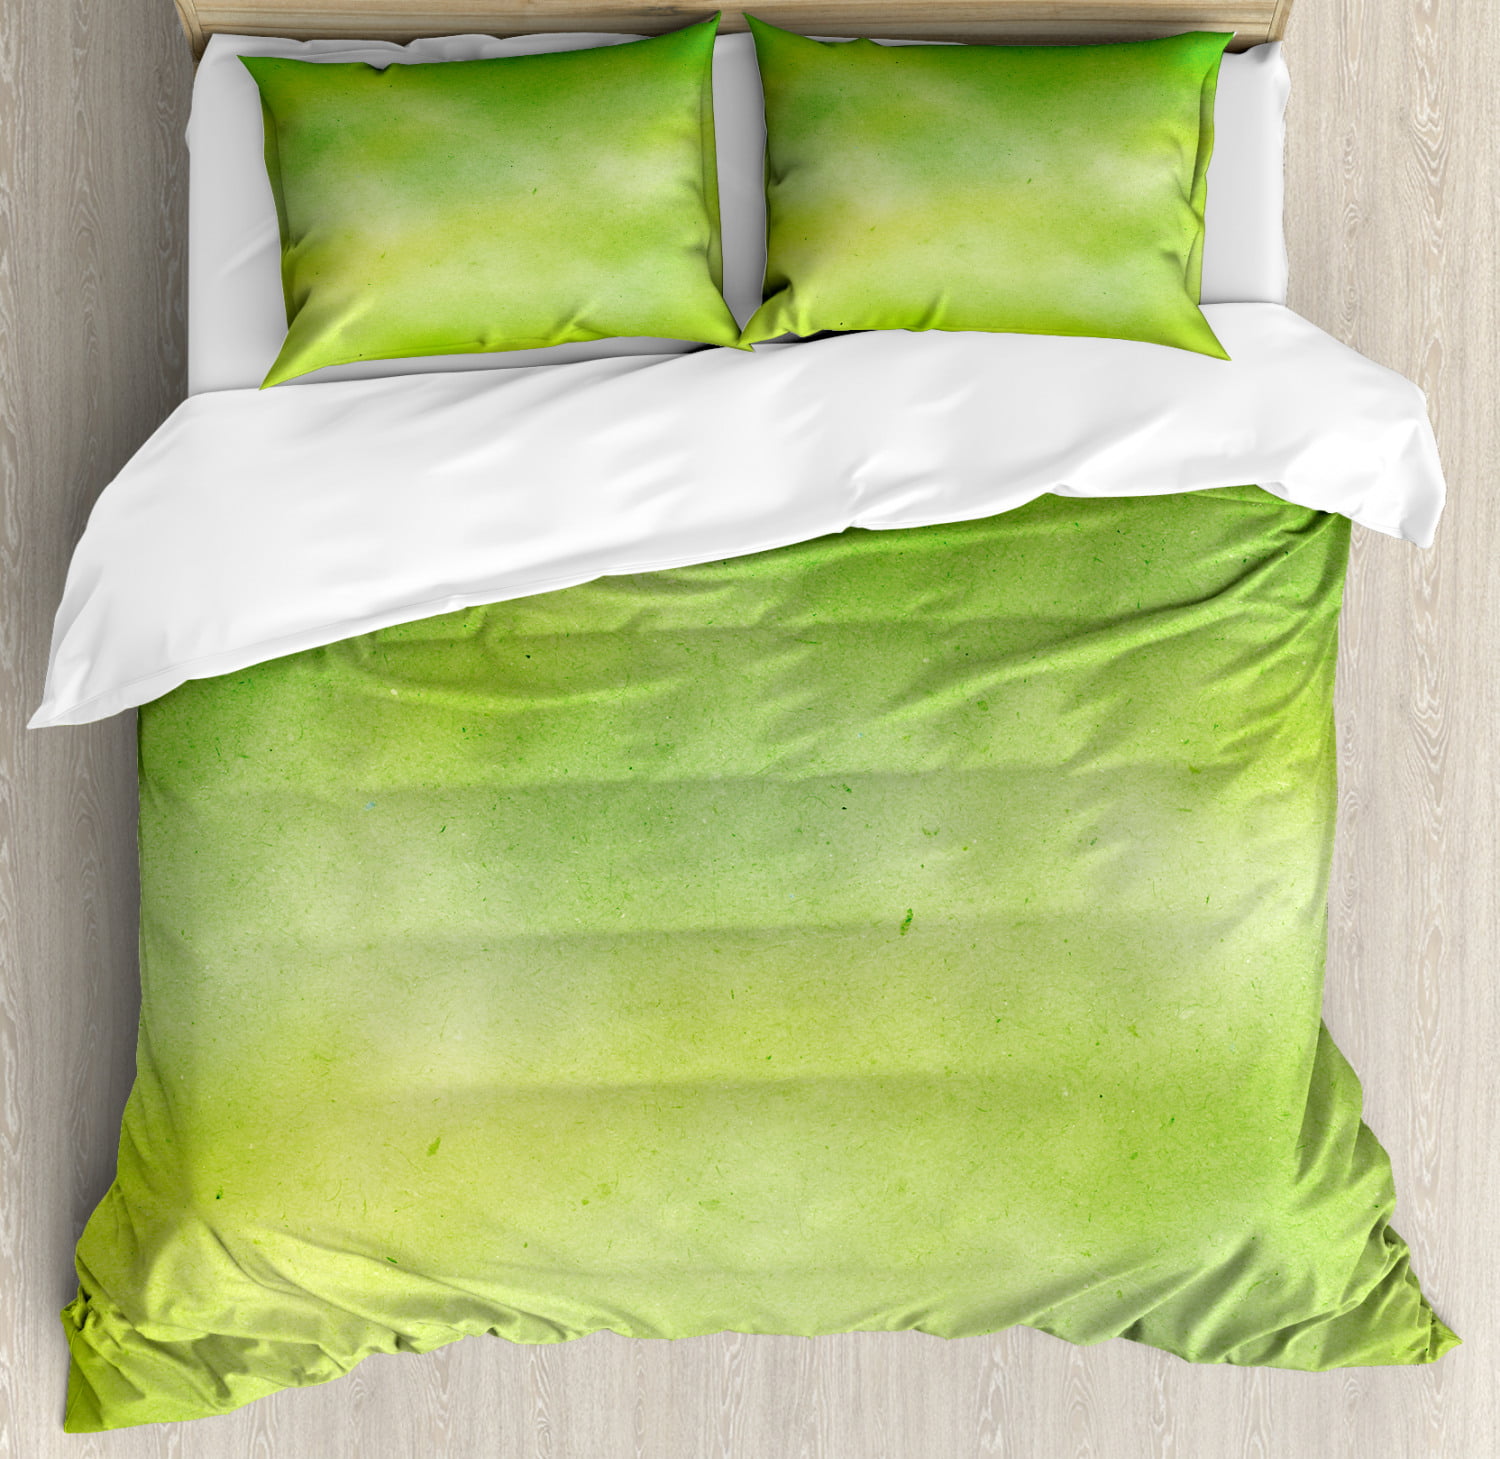 Lime Green King Size Duvet Cover Set Blurry Faded Tones With